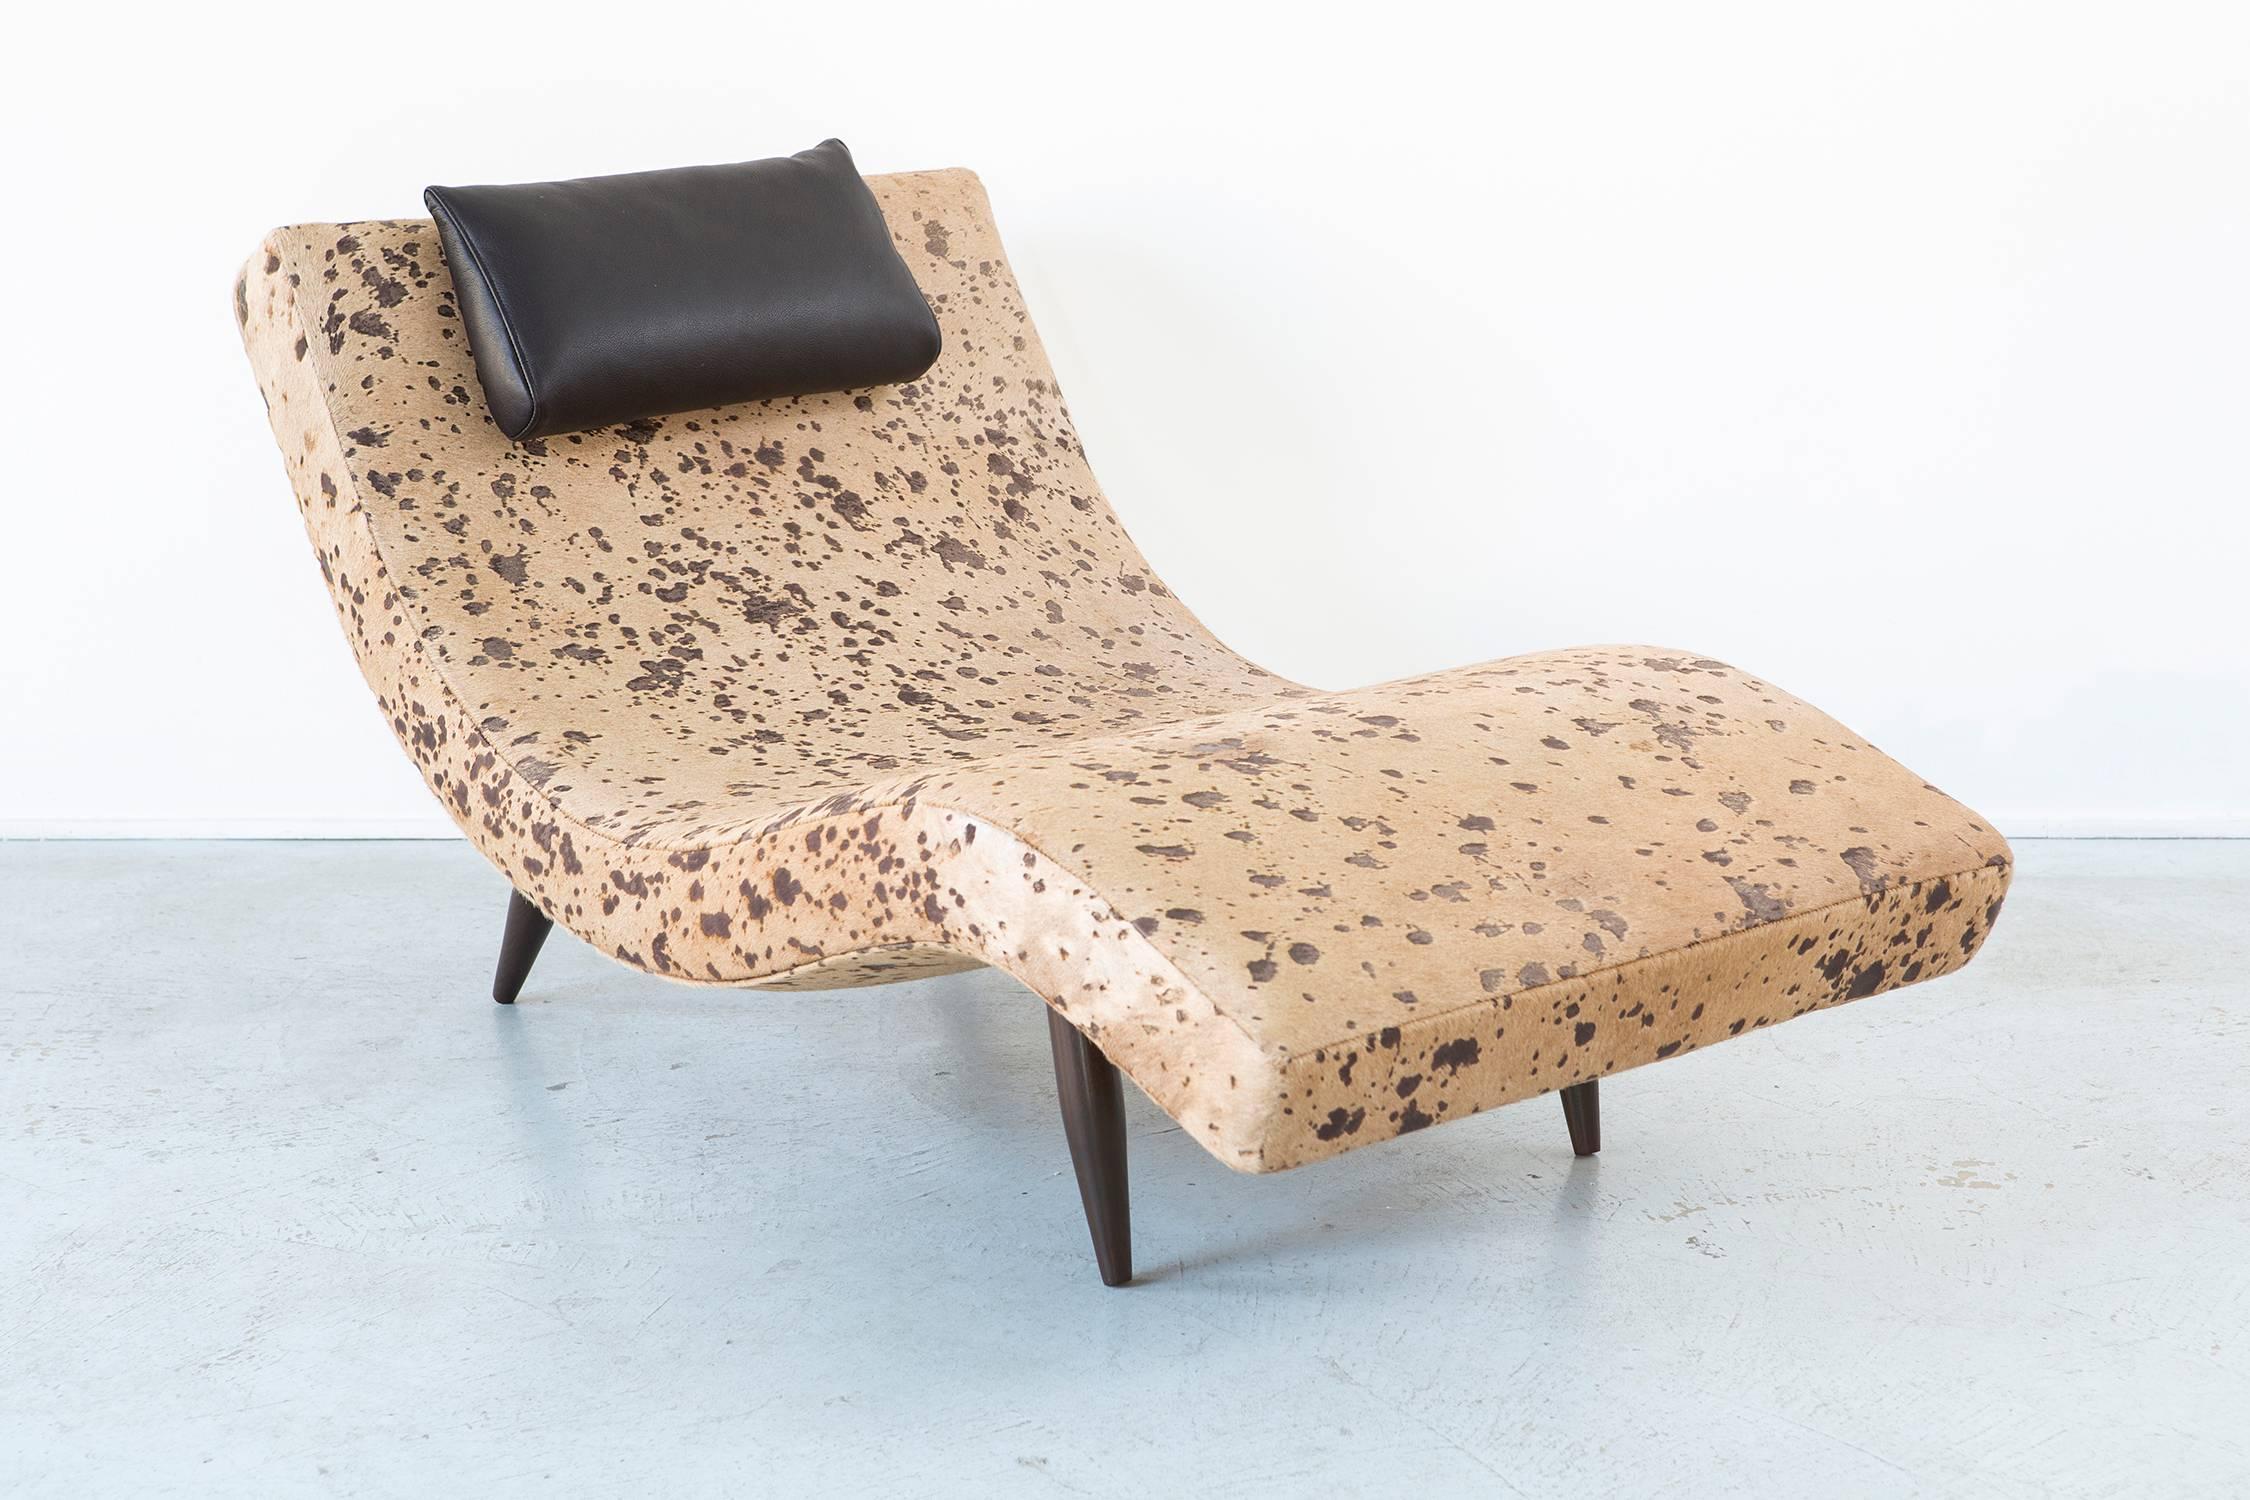 American Mid-Century Adrian Pearsall Wave Chaise Reupholstered in Acid Washed Cowhid